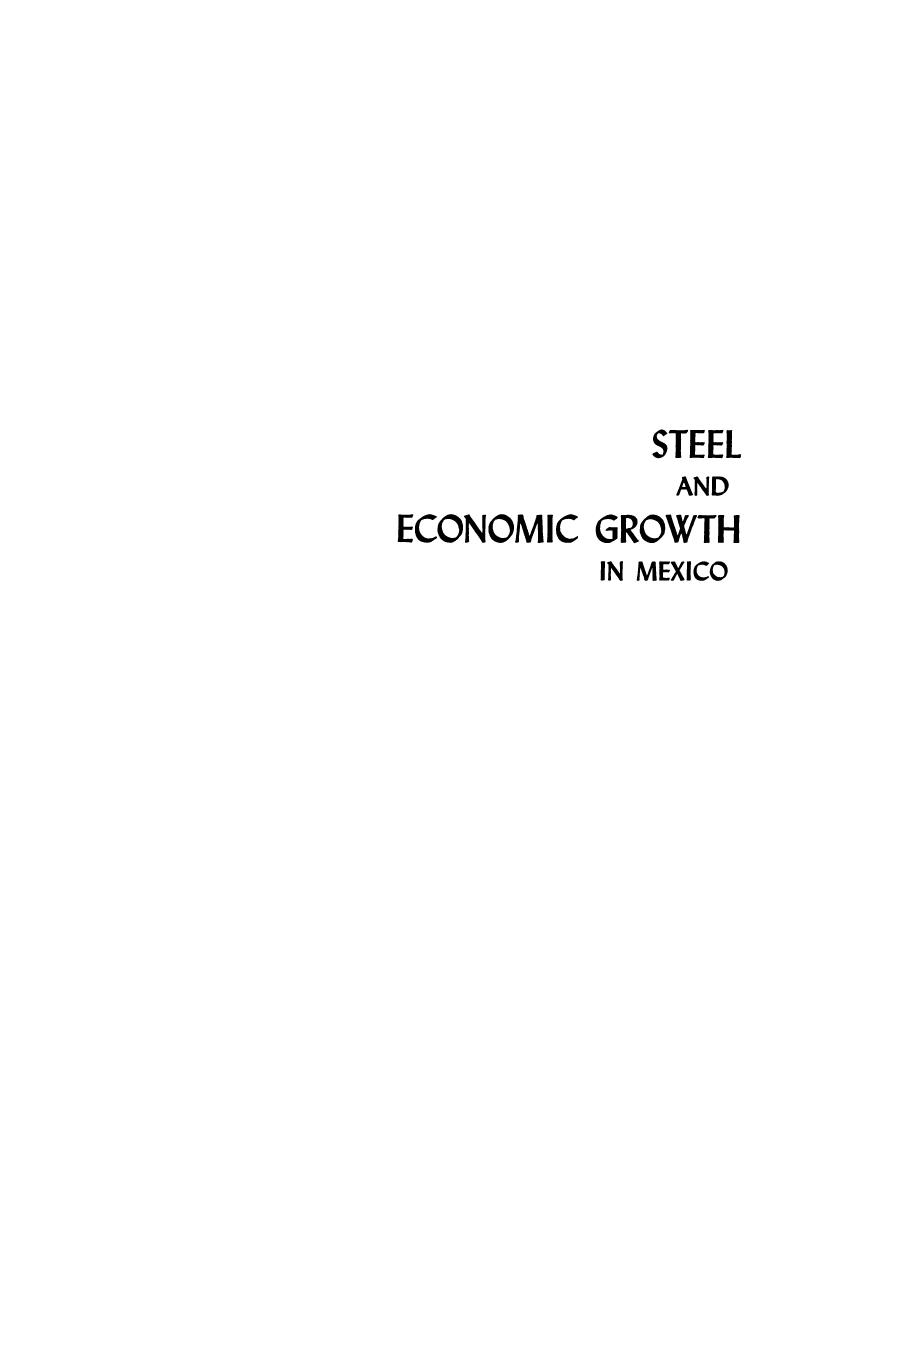 Steel and Economic Growth in Mexico by William Edward Cole